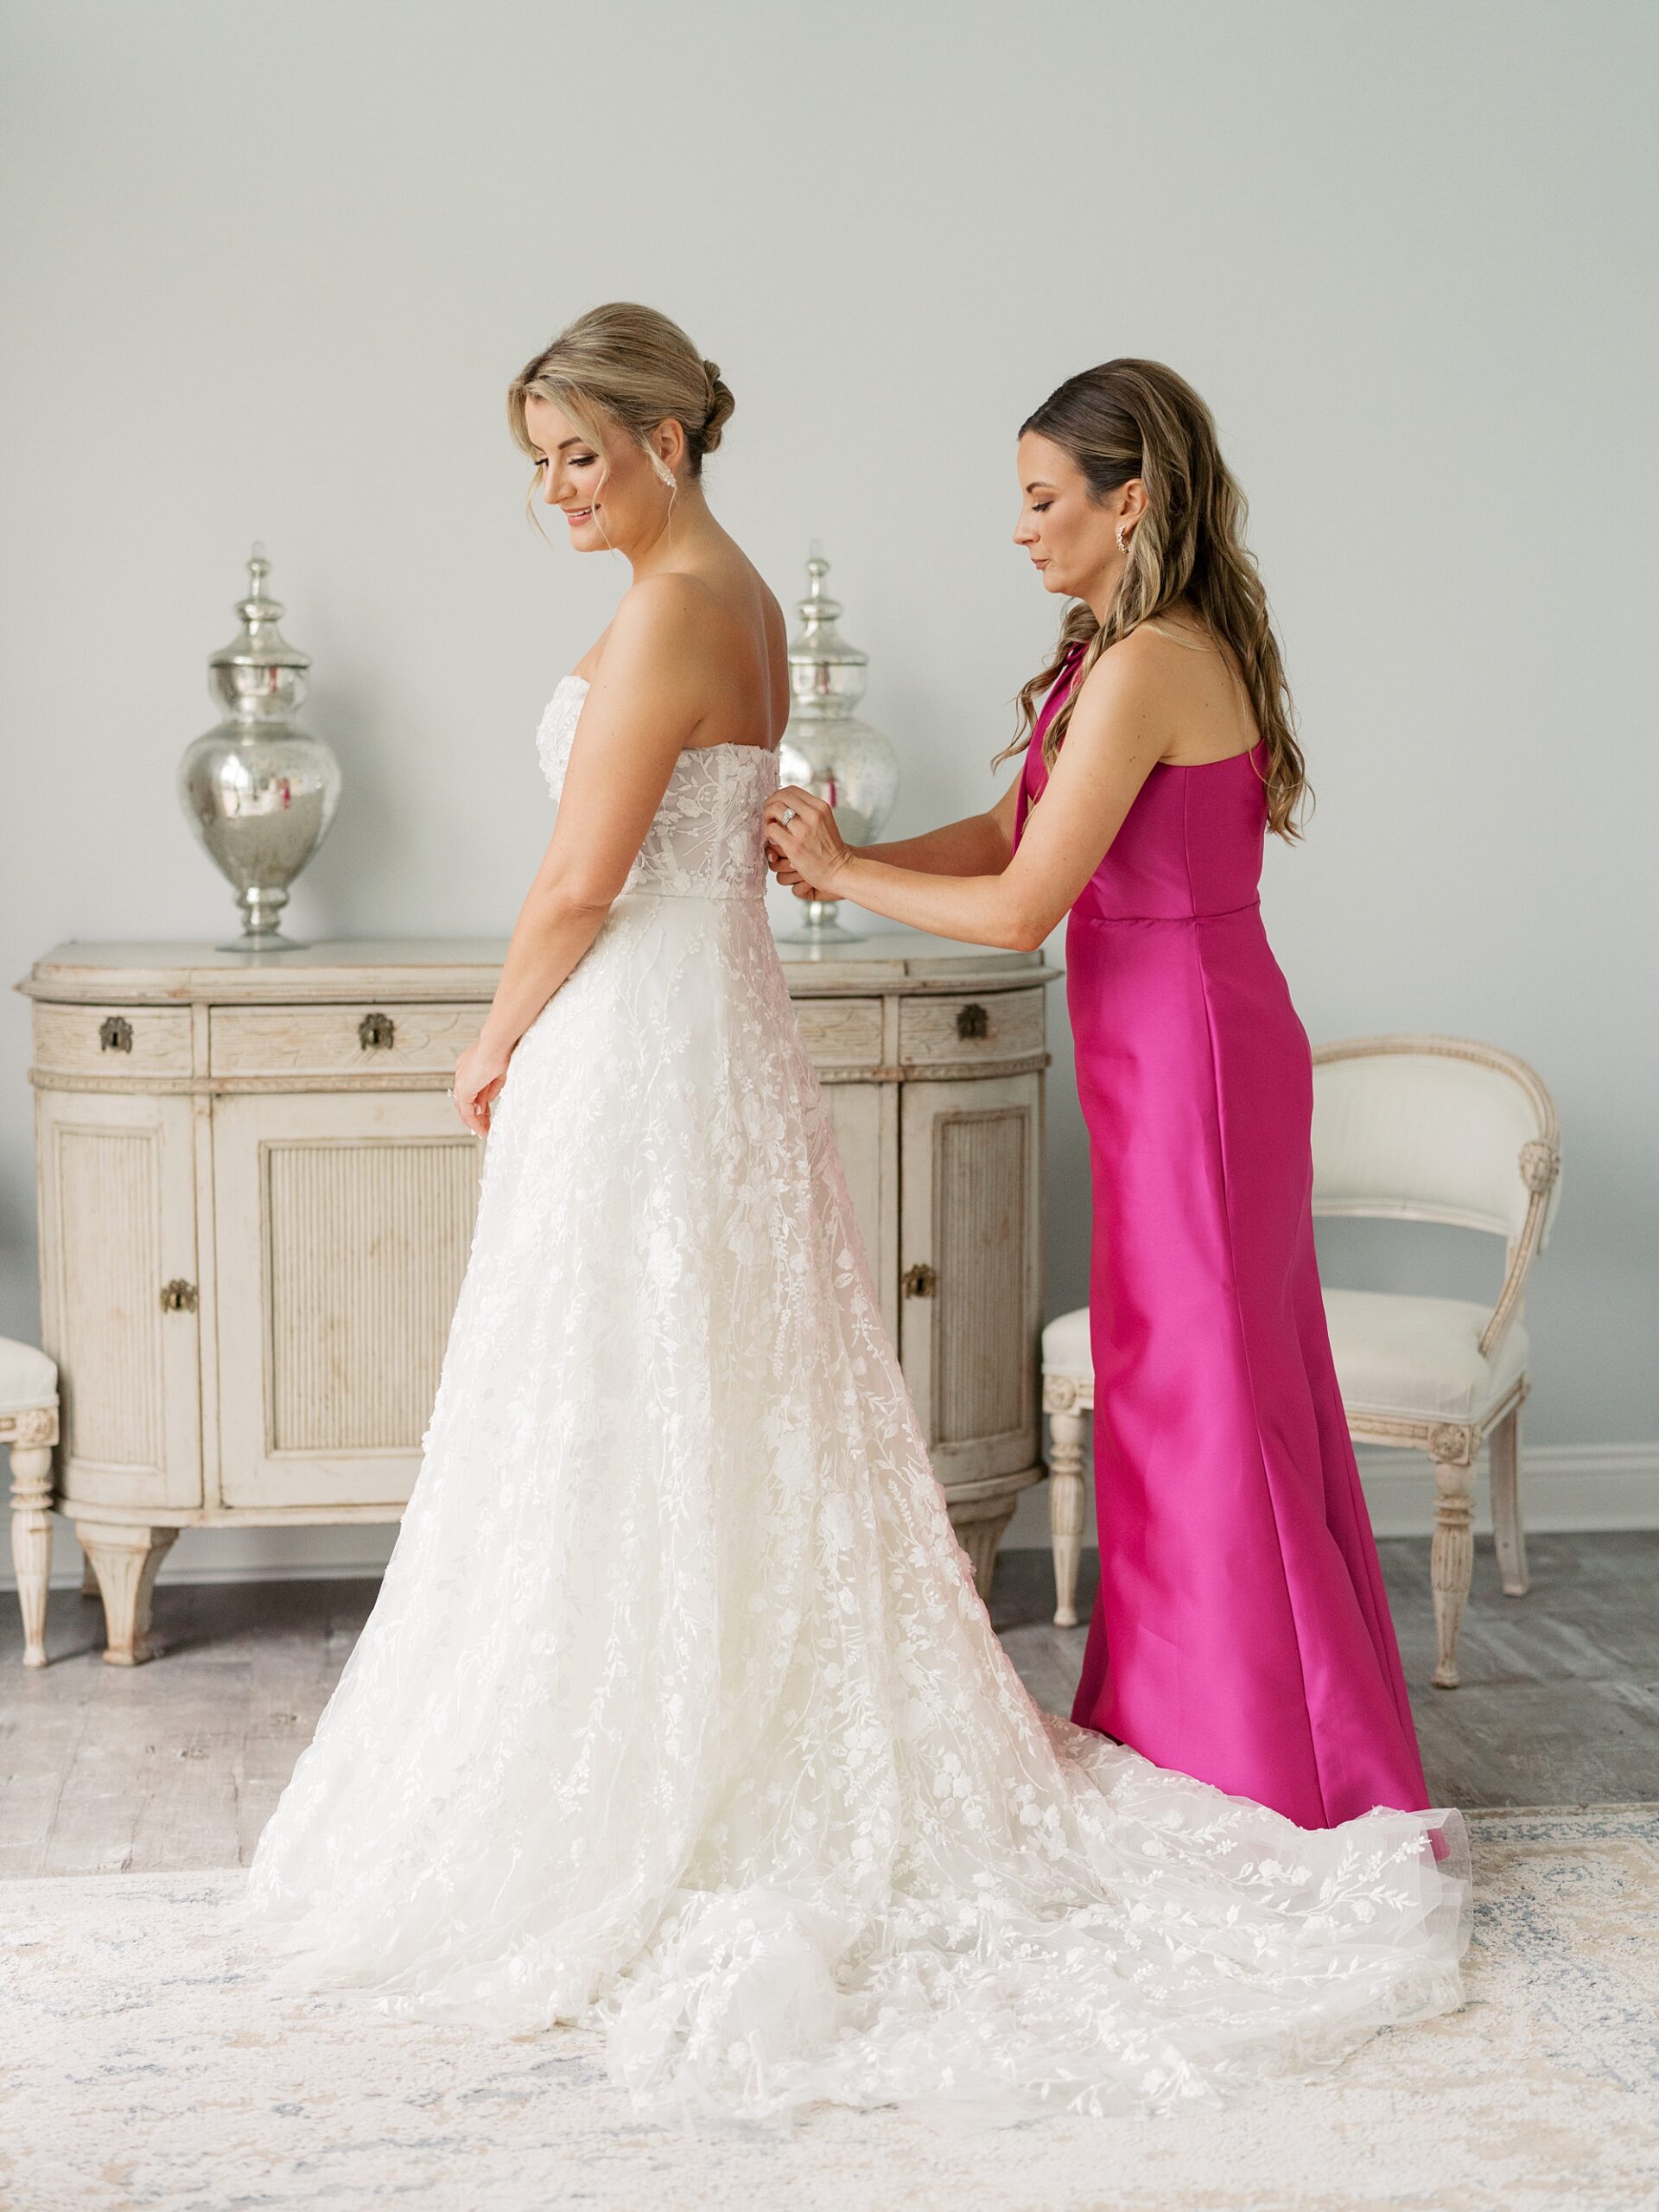 bridesmaid in bright pink gown helps bride into wedding dress